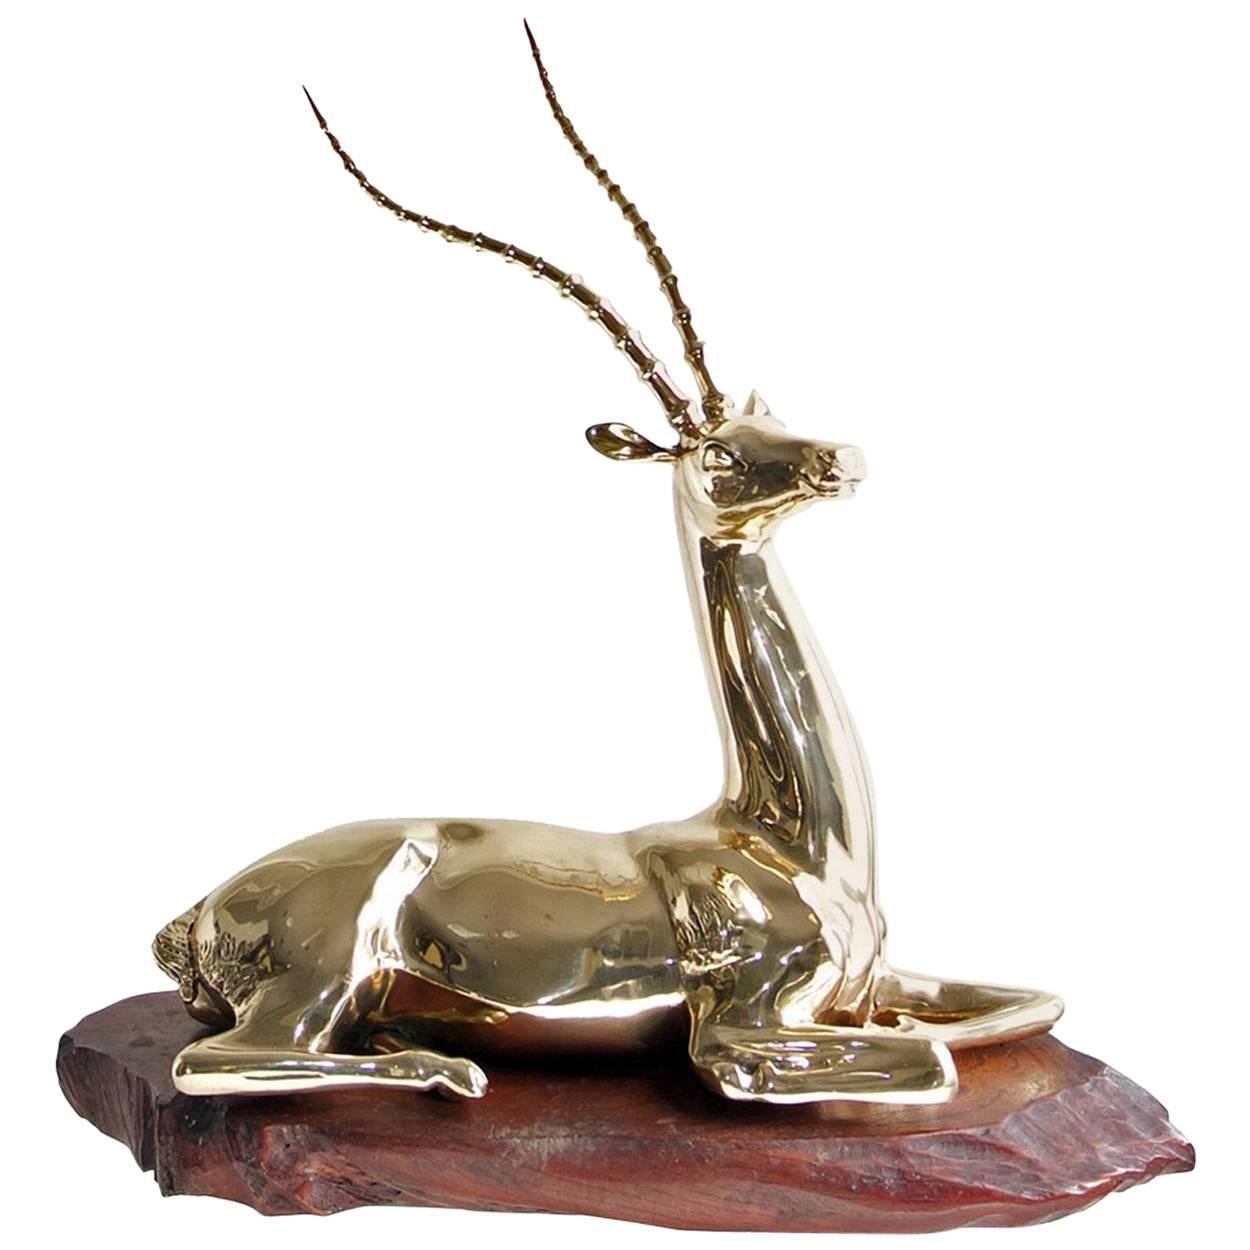 Restored Mid-20th Century Brass Sculpture of Impala on Natural Edge Wood Bas For Sale